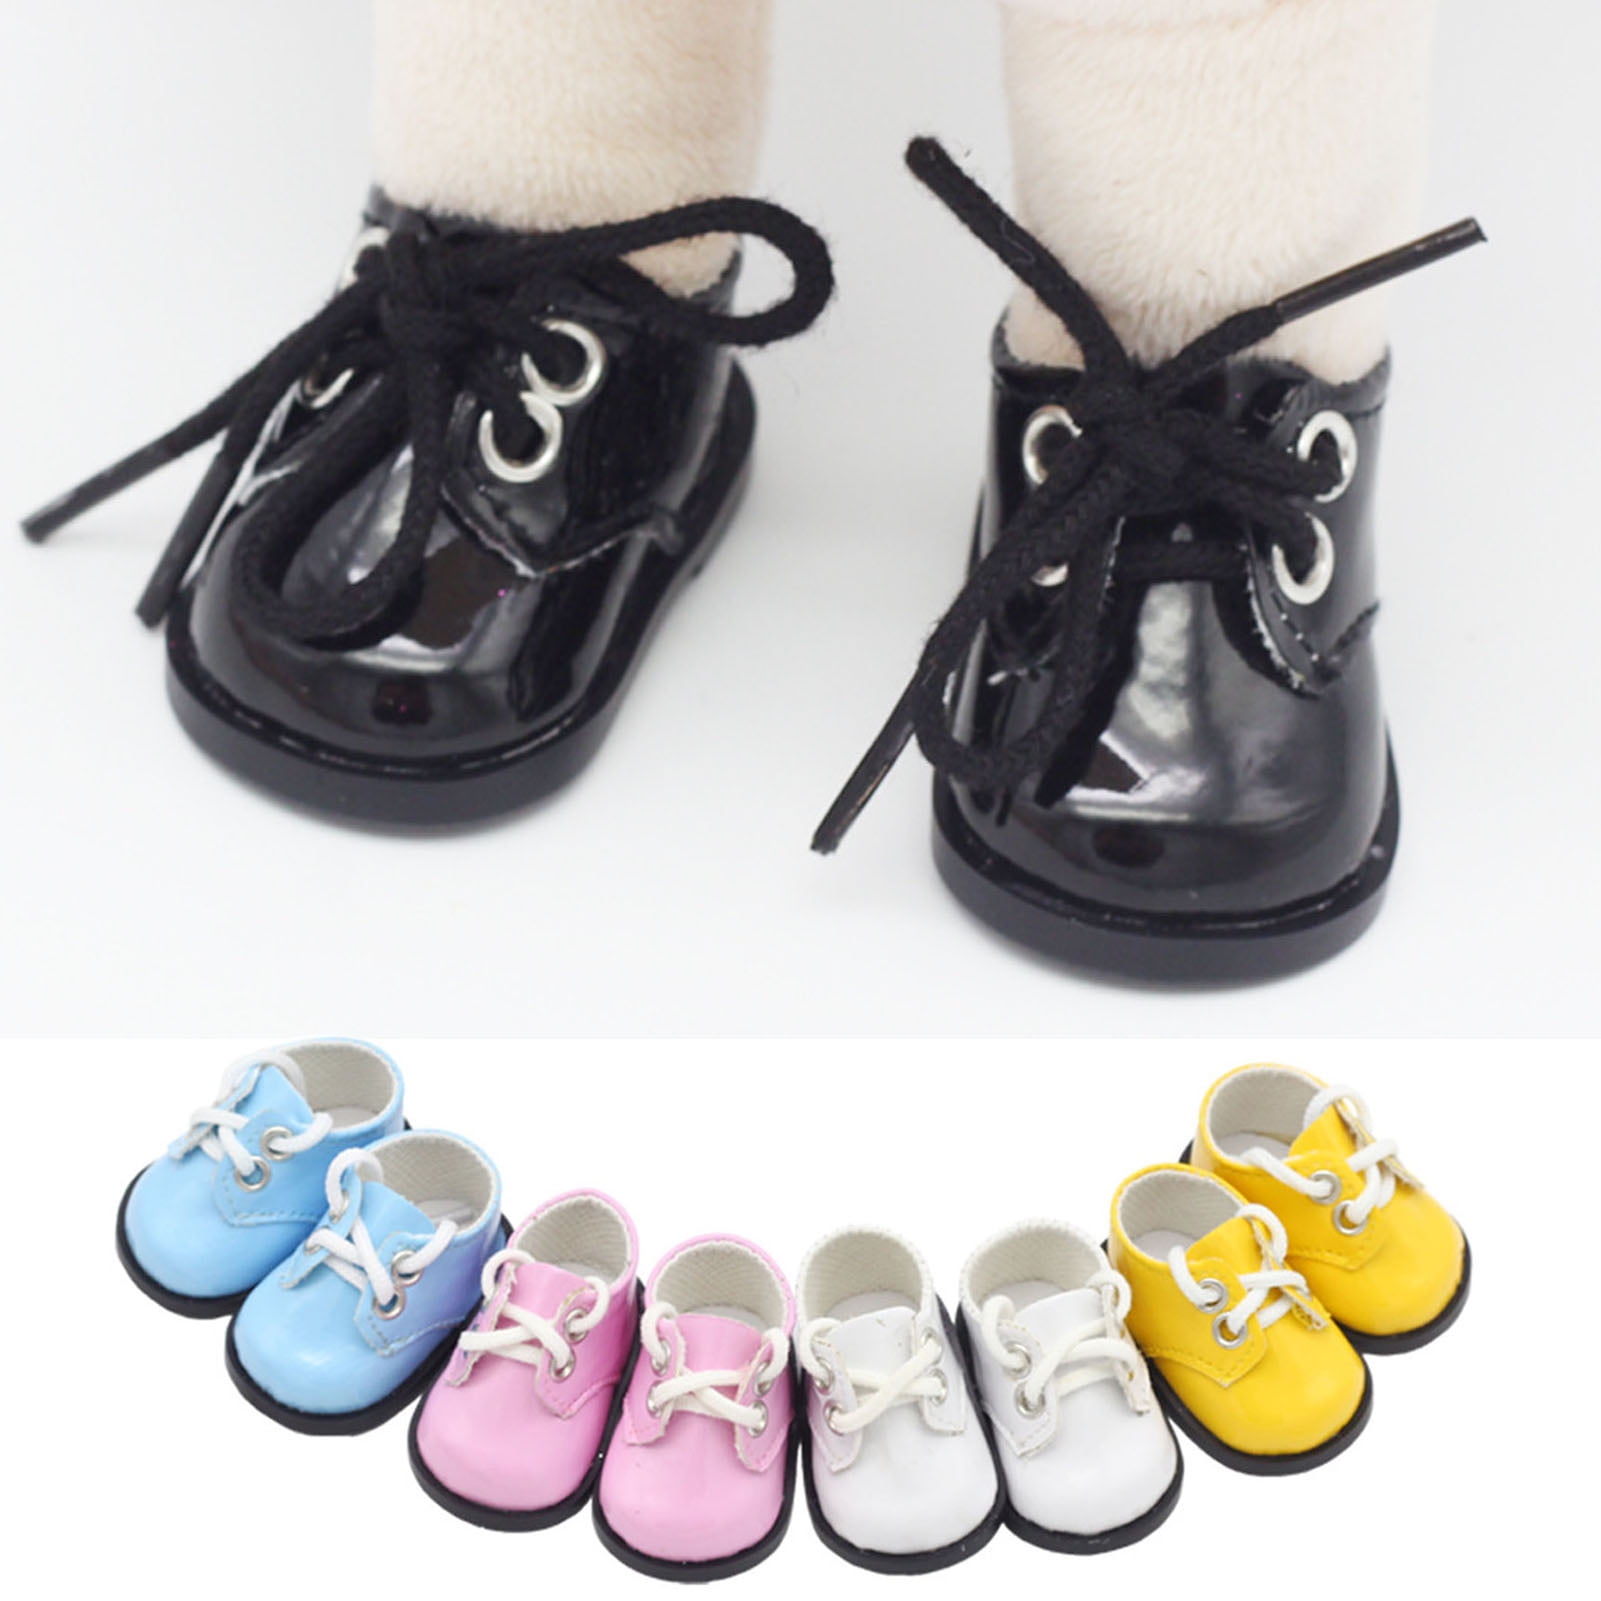 MAGIC GIFT Beautiful Doll Shoes Fits 18 Inch Doll and 43cm baby dolls shoes Hot